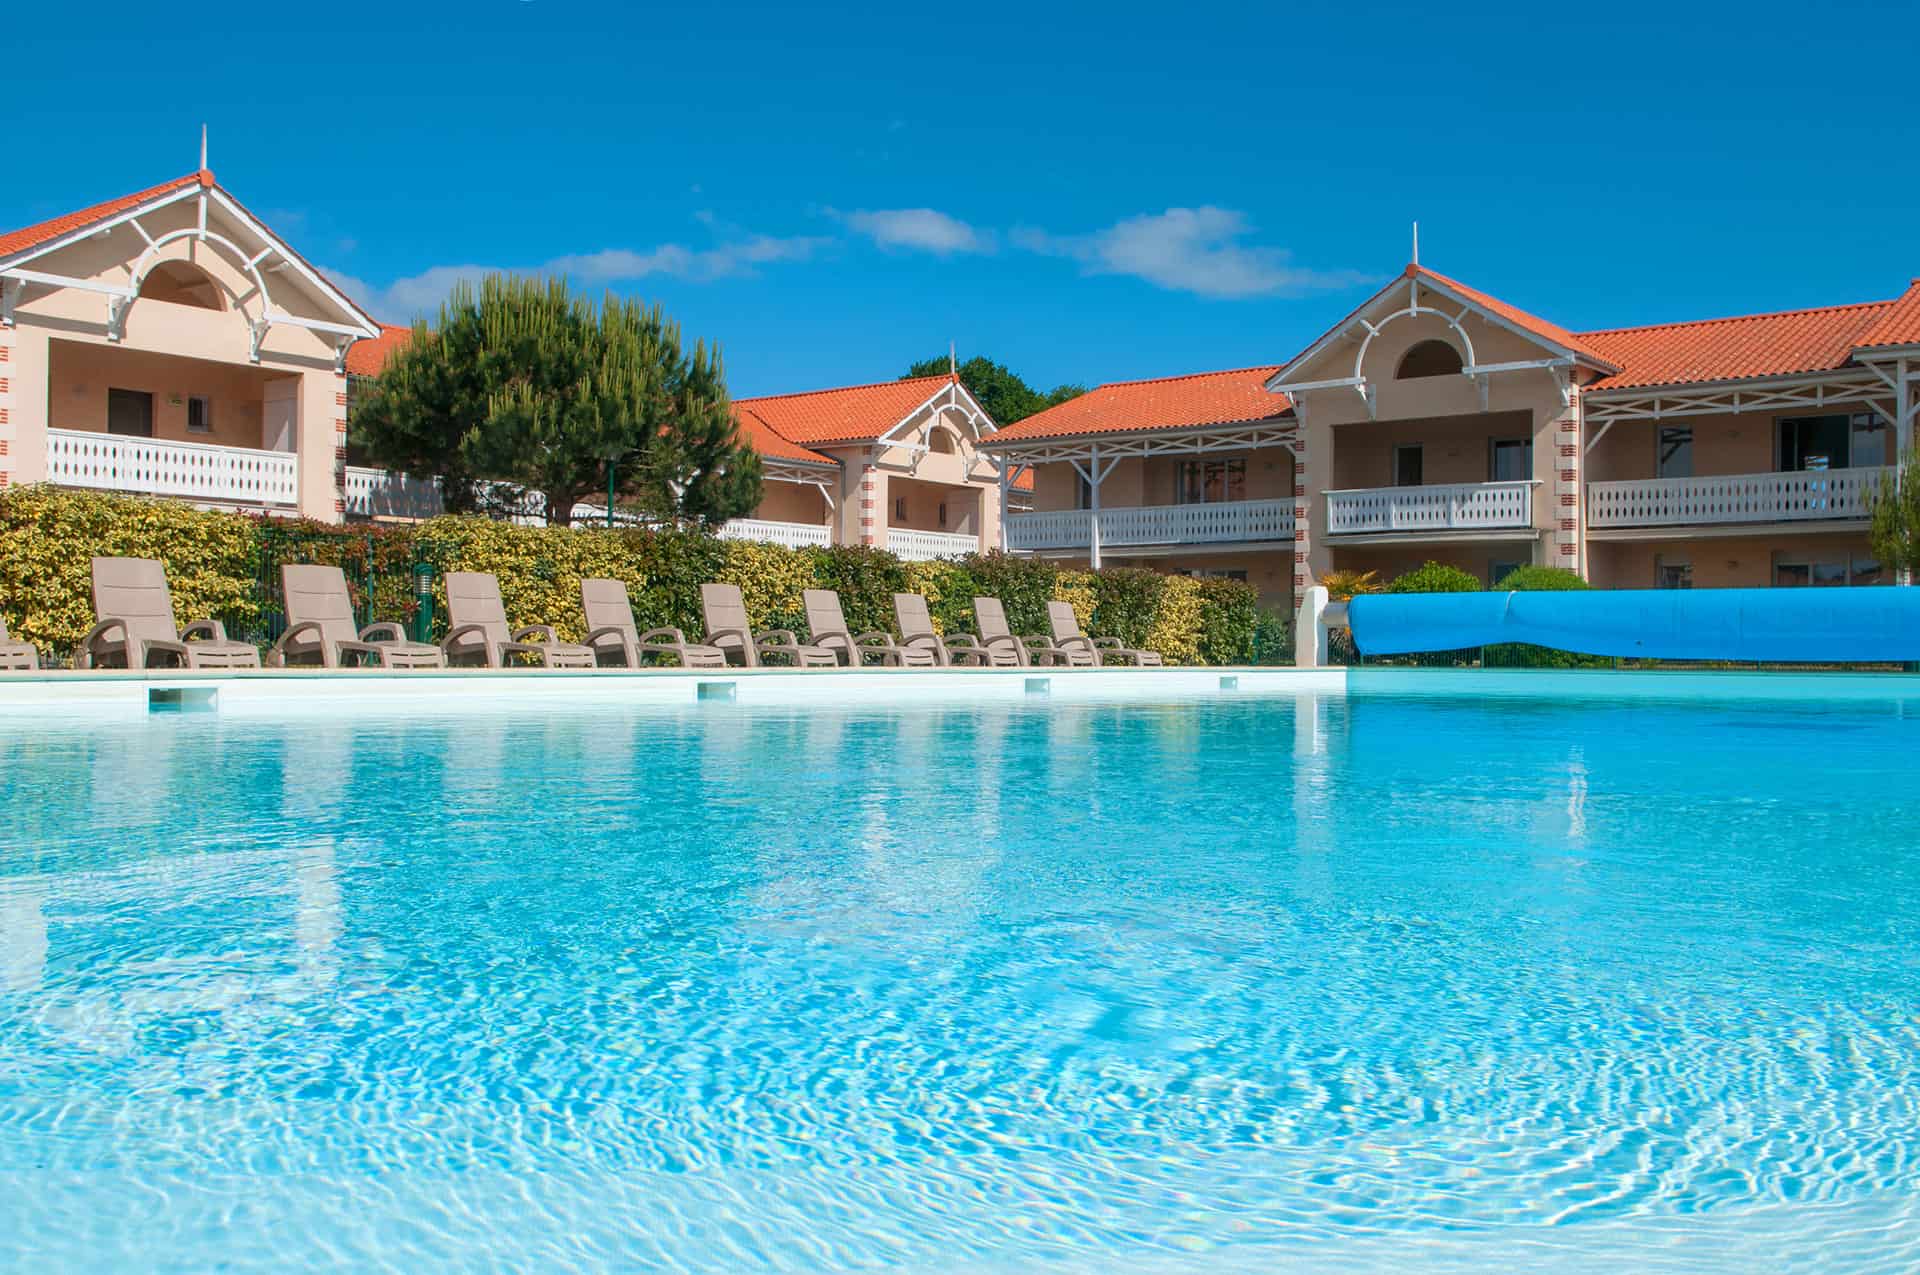 The heated pool of the Goélia Le Cordouan holiday complex in Soulac sur Mer